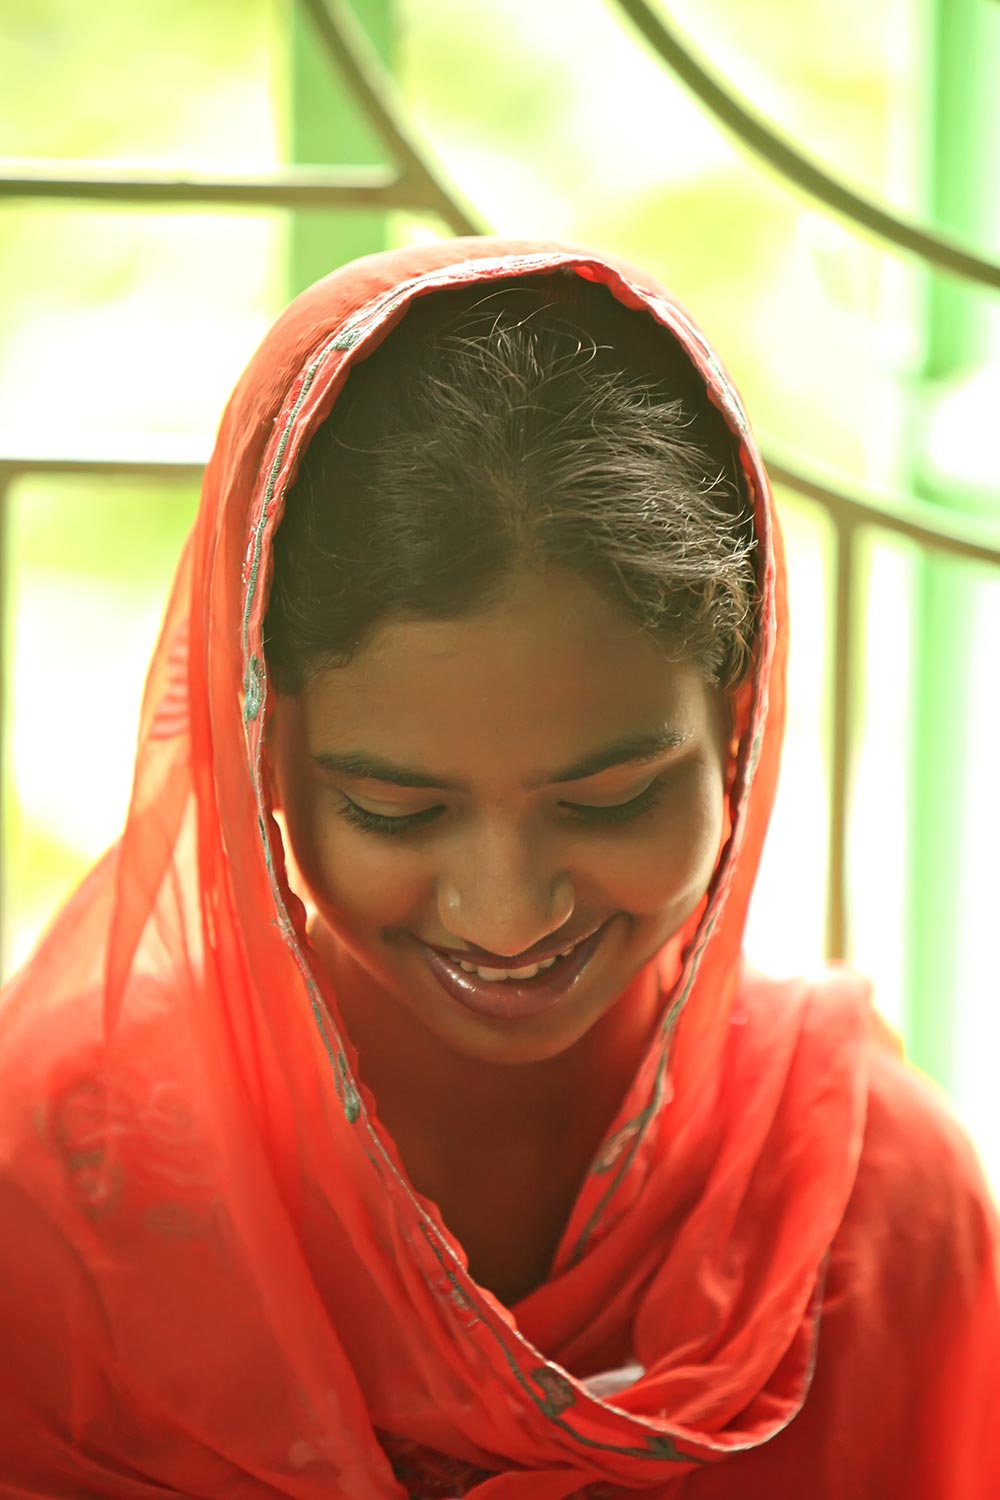 Saiful's bride-in-waiting allows herself a shy smile when we inform her Saiful will be headed home soon